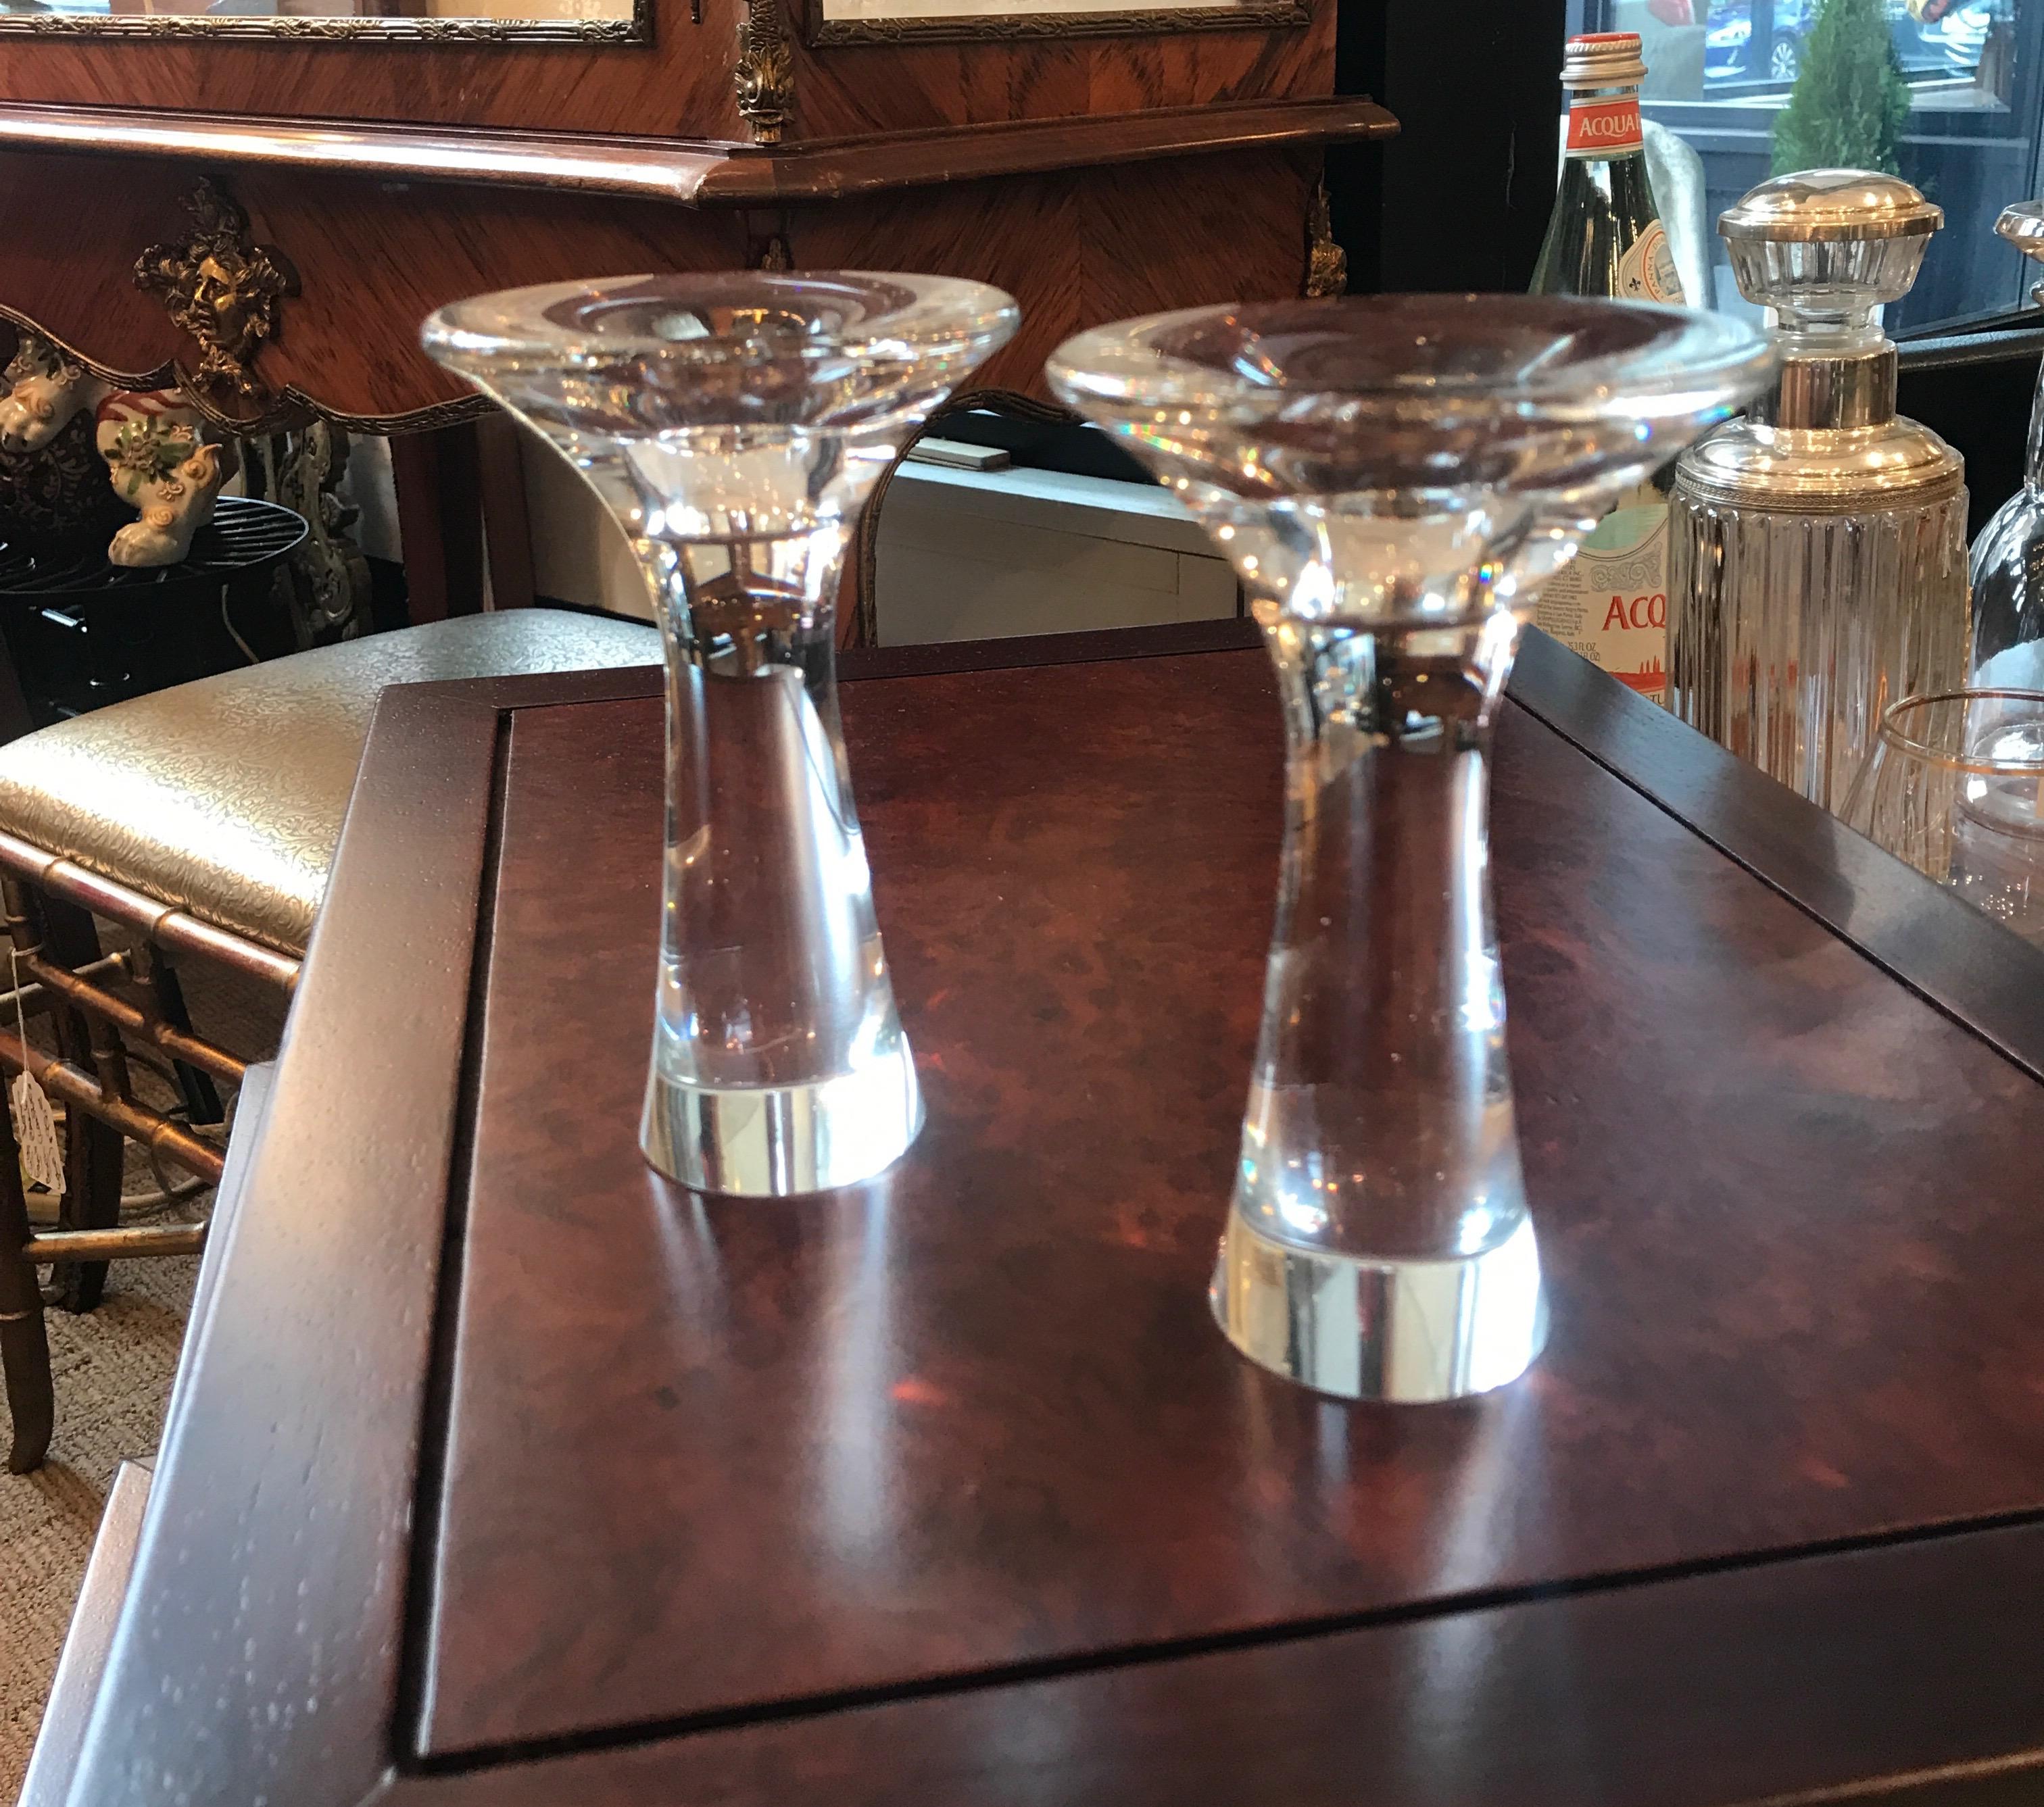 These 2 glass candlesticks are designed by Tapio Wirkkala is called Model 3412.
The object is a Classic manufactured by the Finnish workshop Iittala. The pieces is from the 1960s and signed on the bottom 